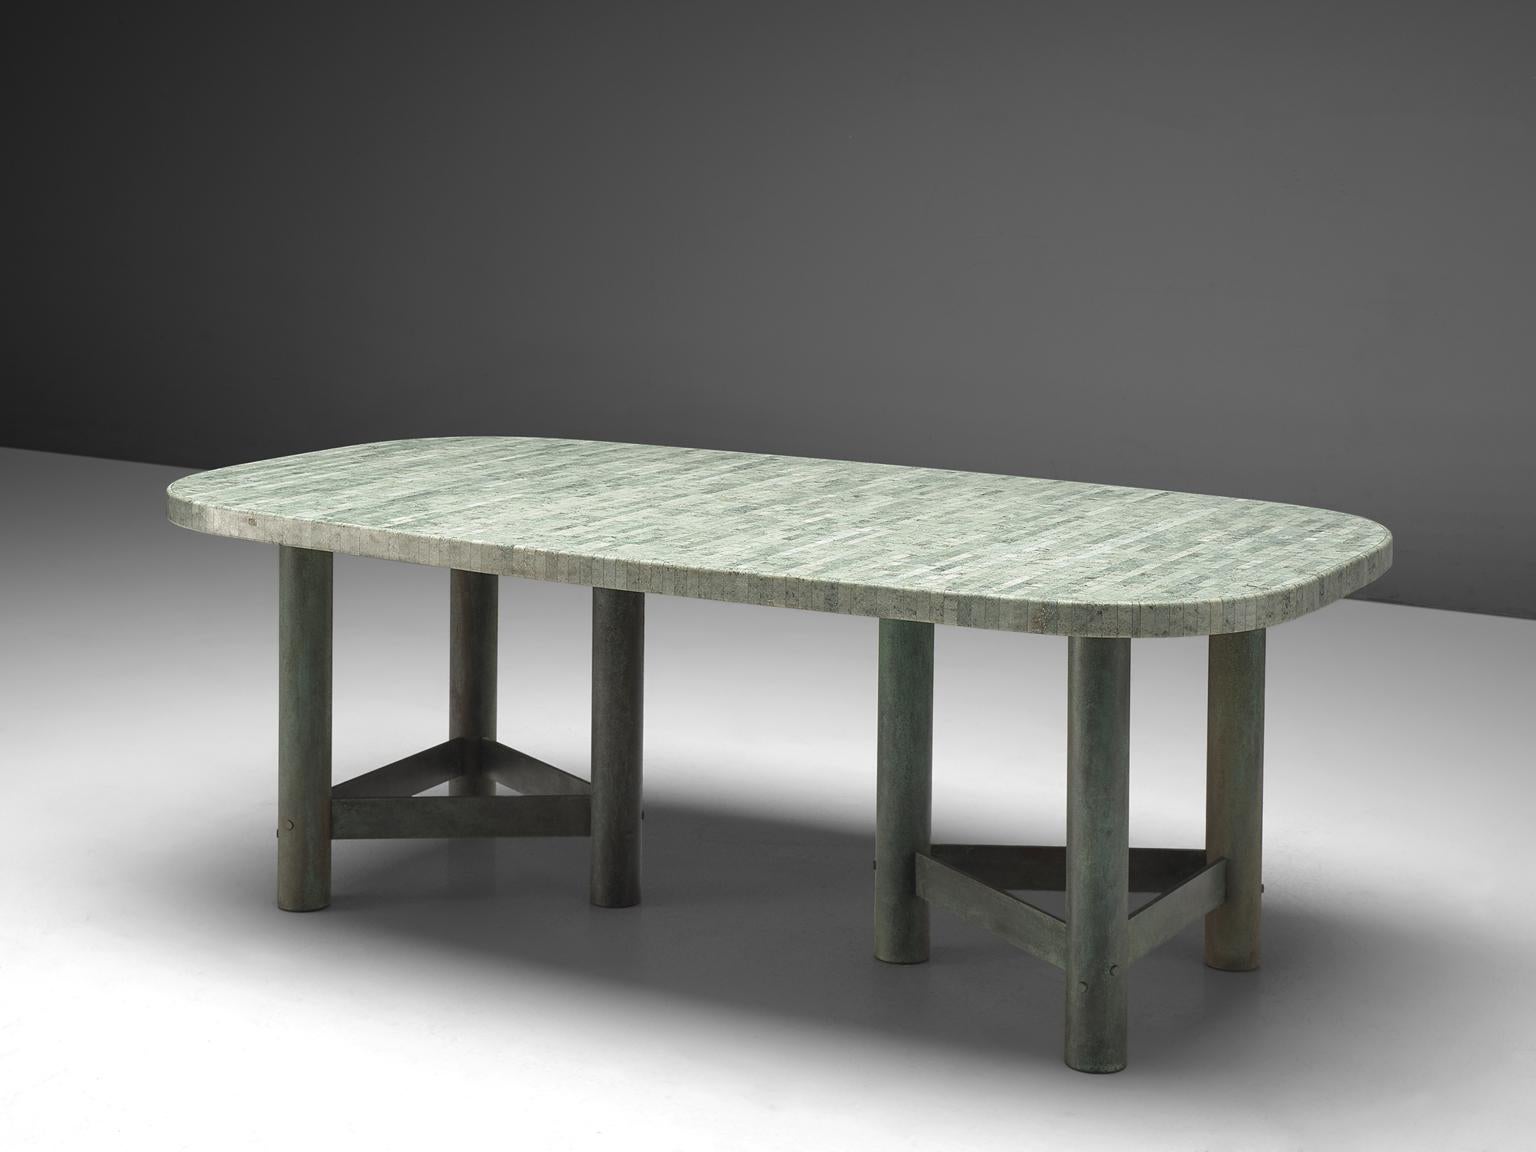 Jan Vlug, dining table, marble and patinated bronze, Belgium, 1970s.

Exclusive dining table with characteristic graphical base and oval marble top. The star-shaped base made patinated metal consists of six legs. The repeated rhythm of the legs is